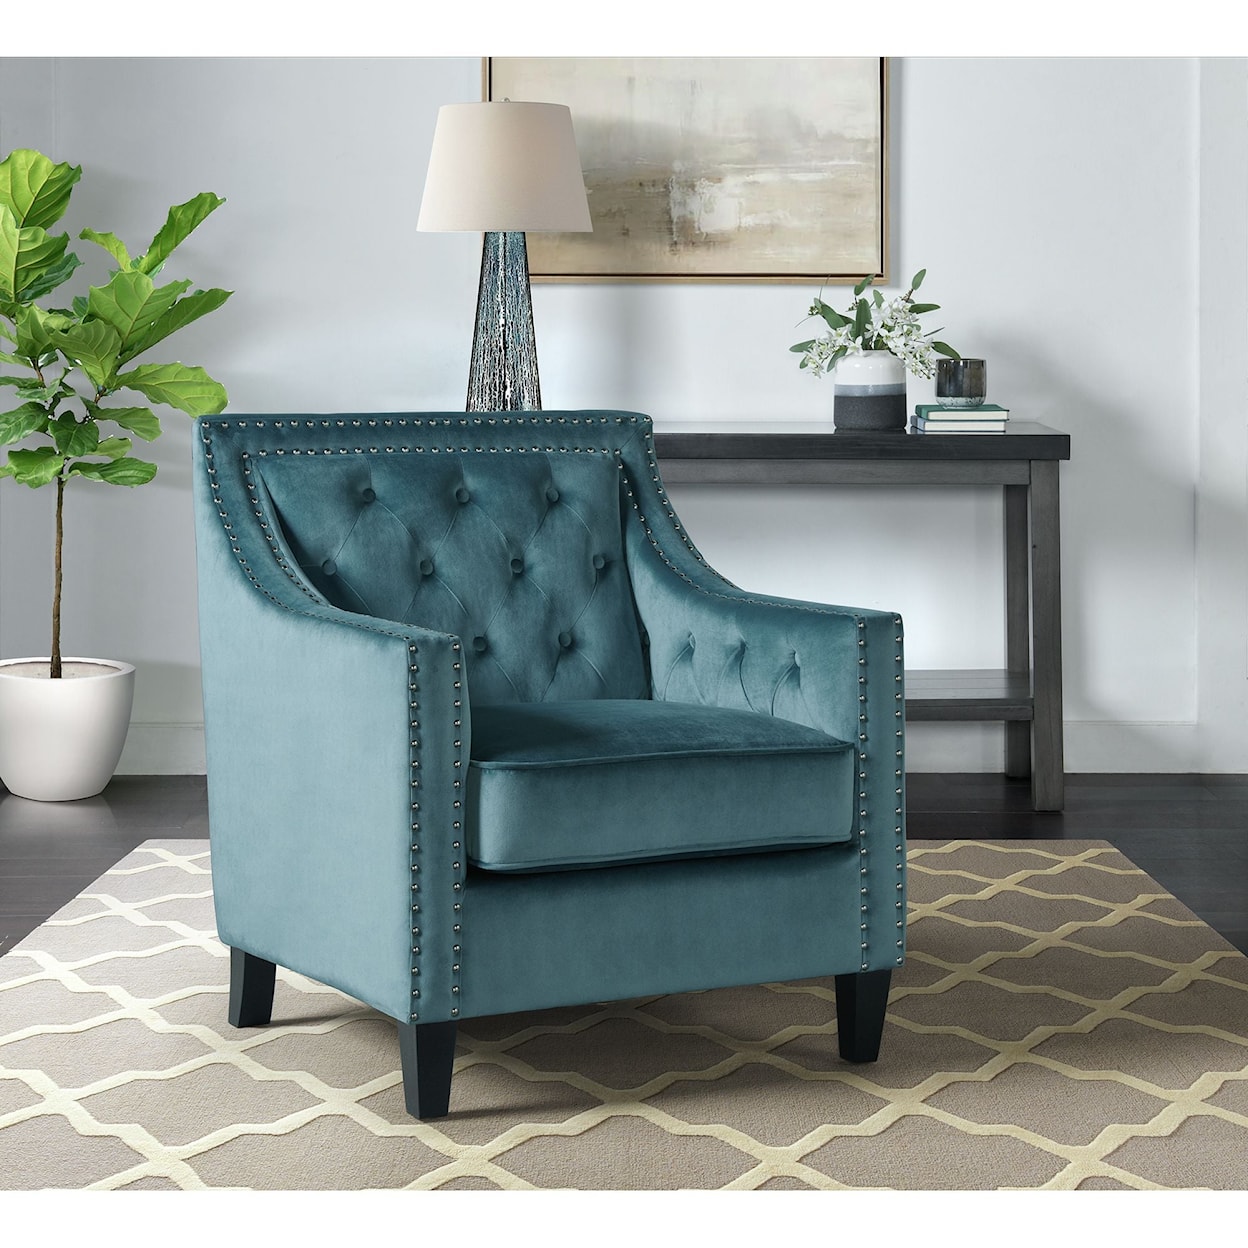 Elements International Tiffany Accent Chair with Nailhead Trim